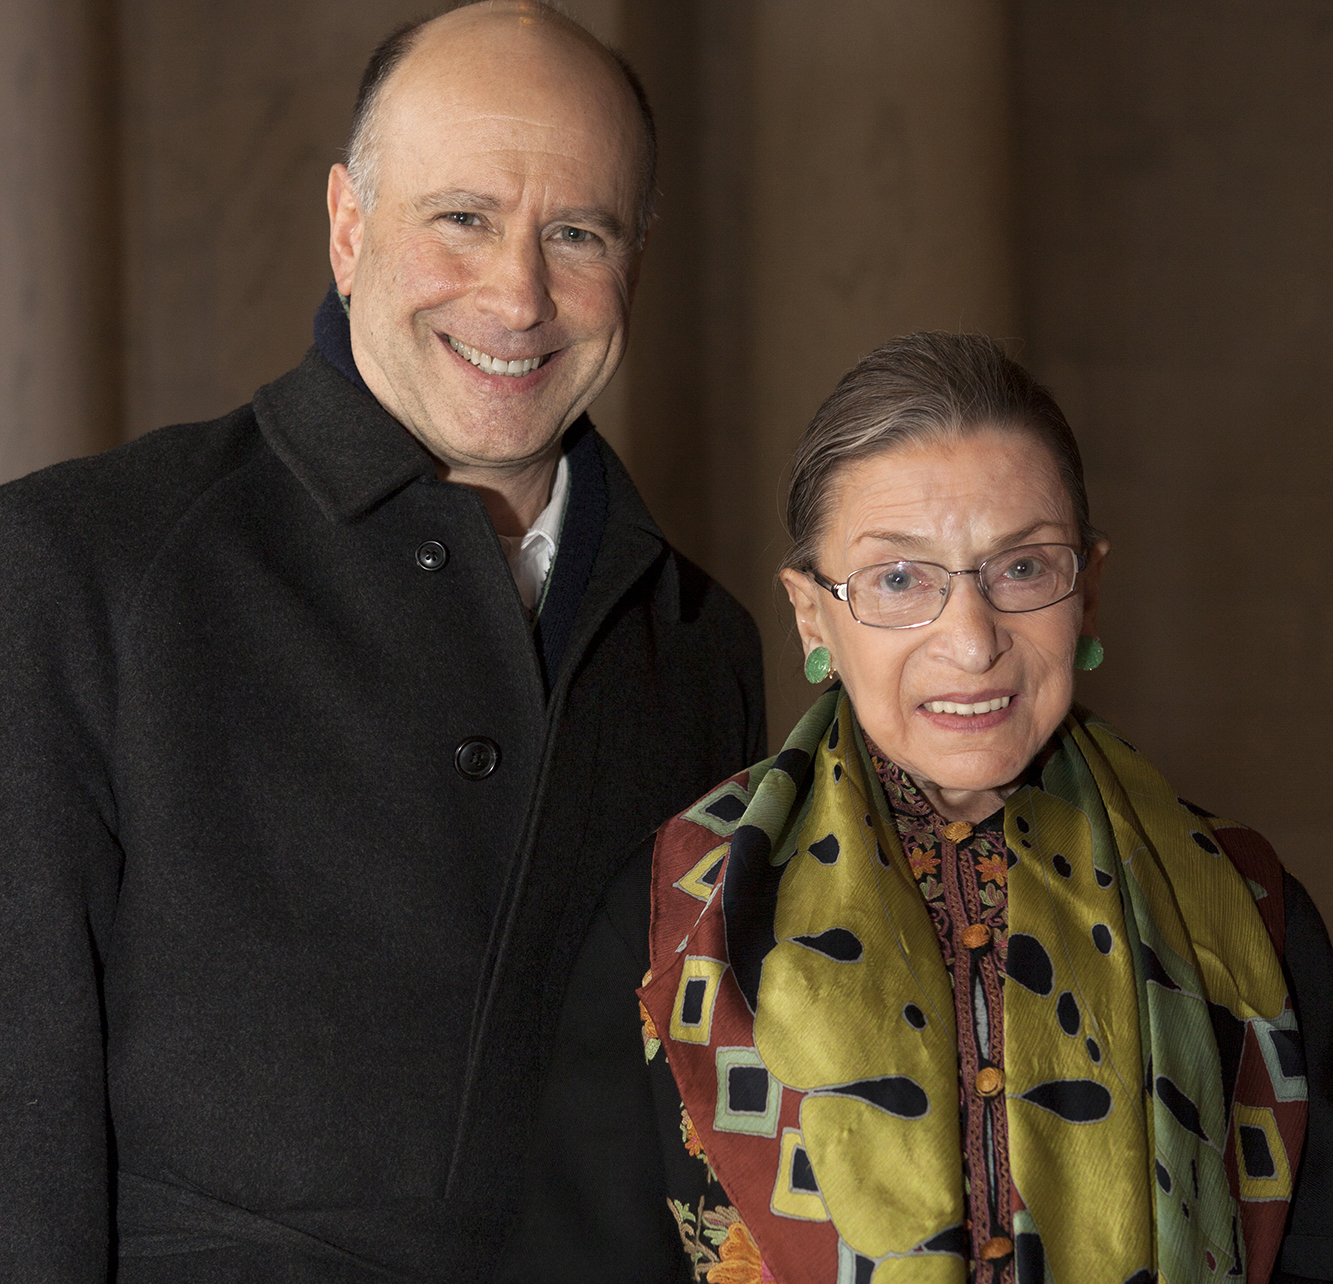 Roger with Justice Ruth Bader Ginsburg after a performance of Anne & Emmett in Washington, DC.